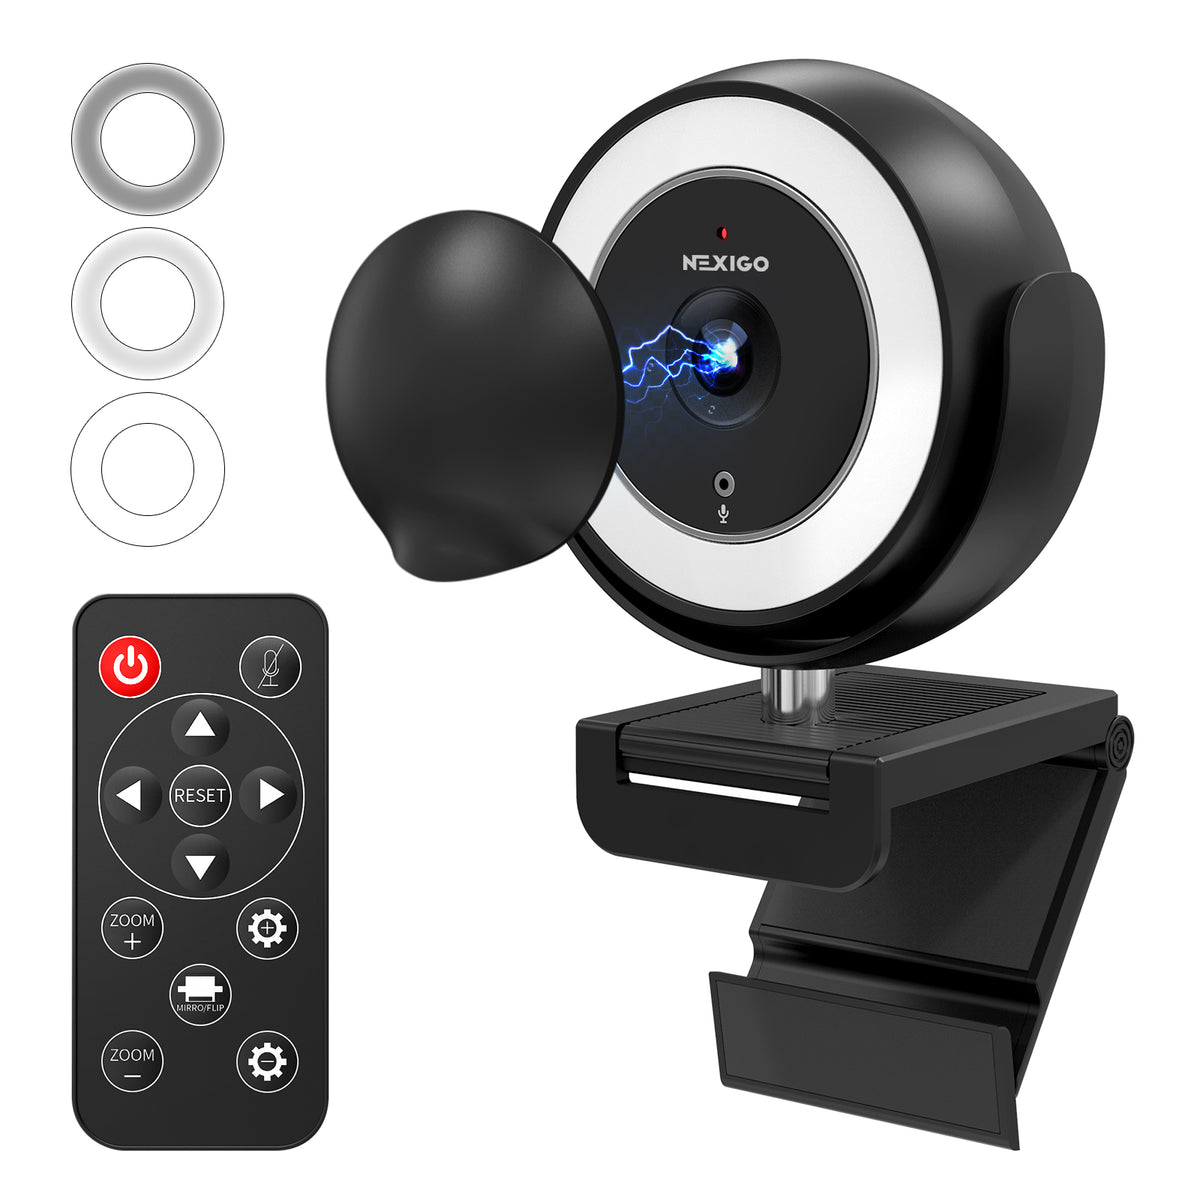 The black-colored ring light webcam comes with a magnetic privacy cover and a remote control